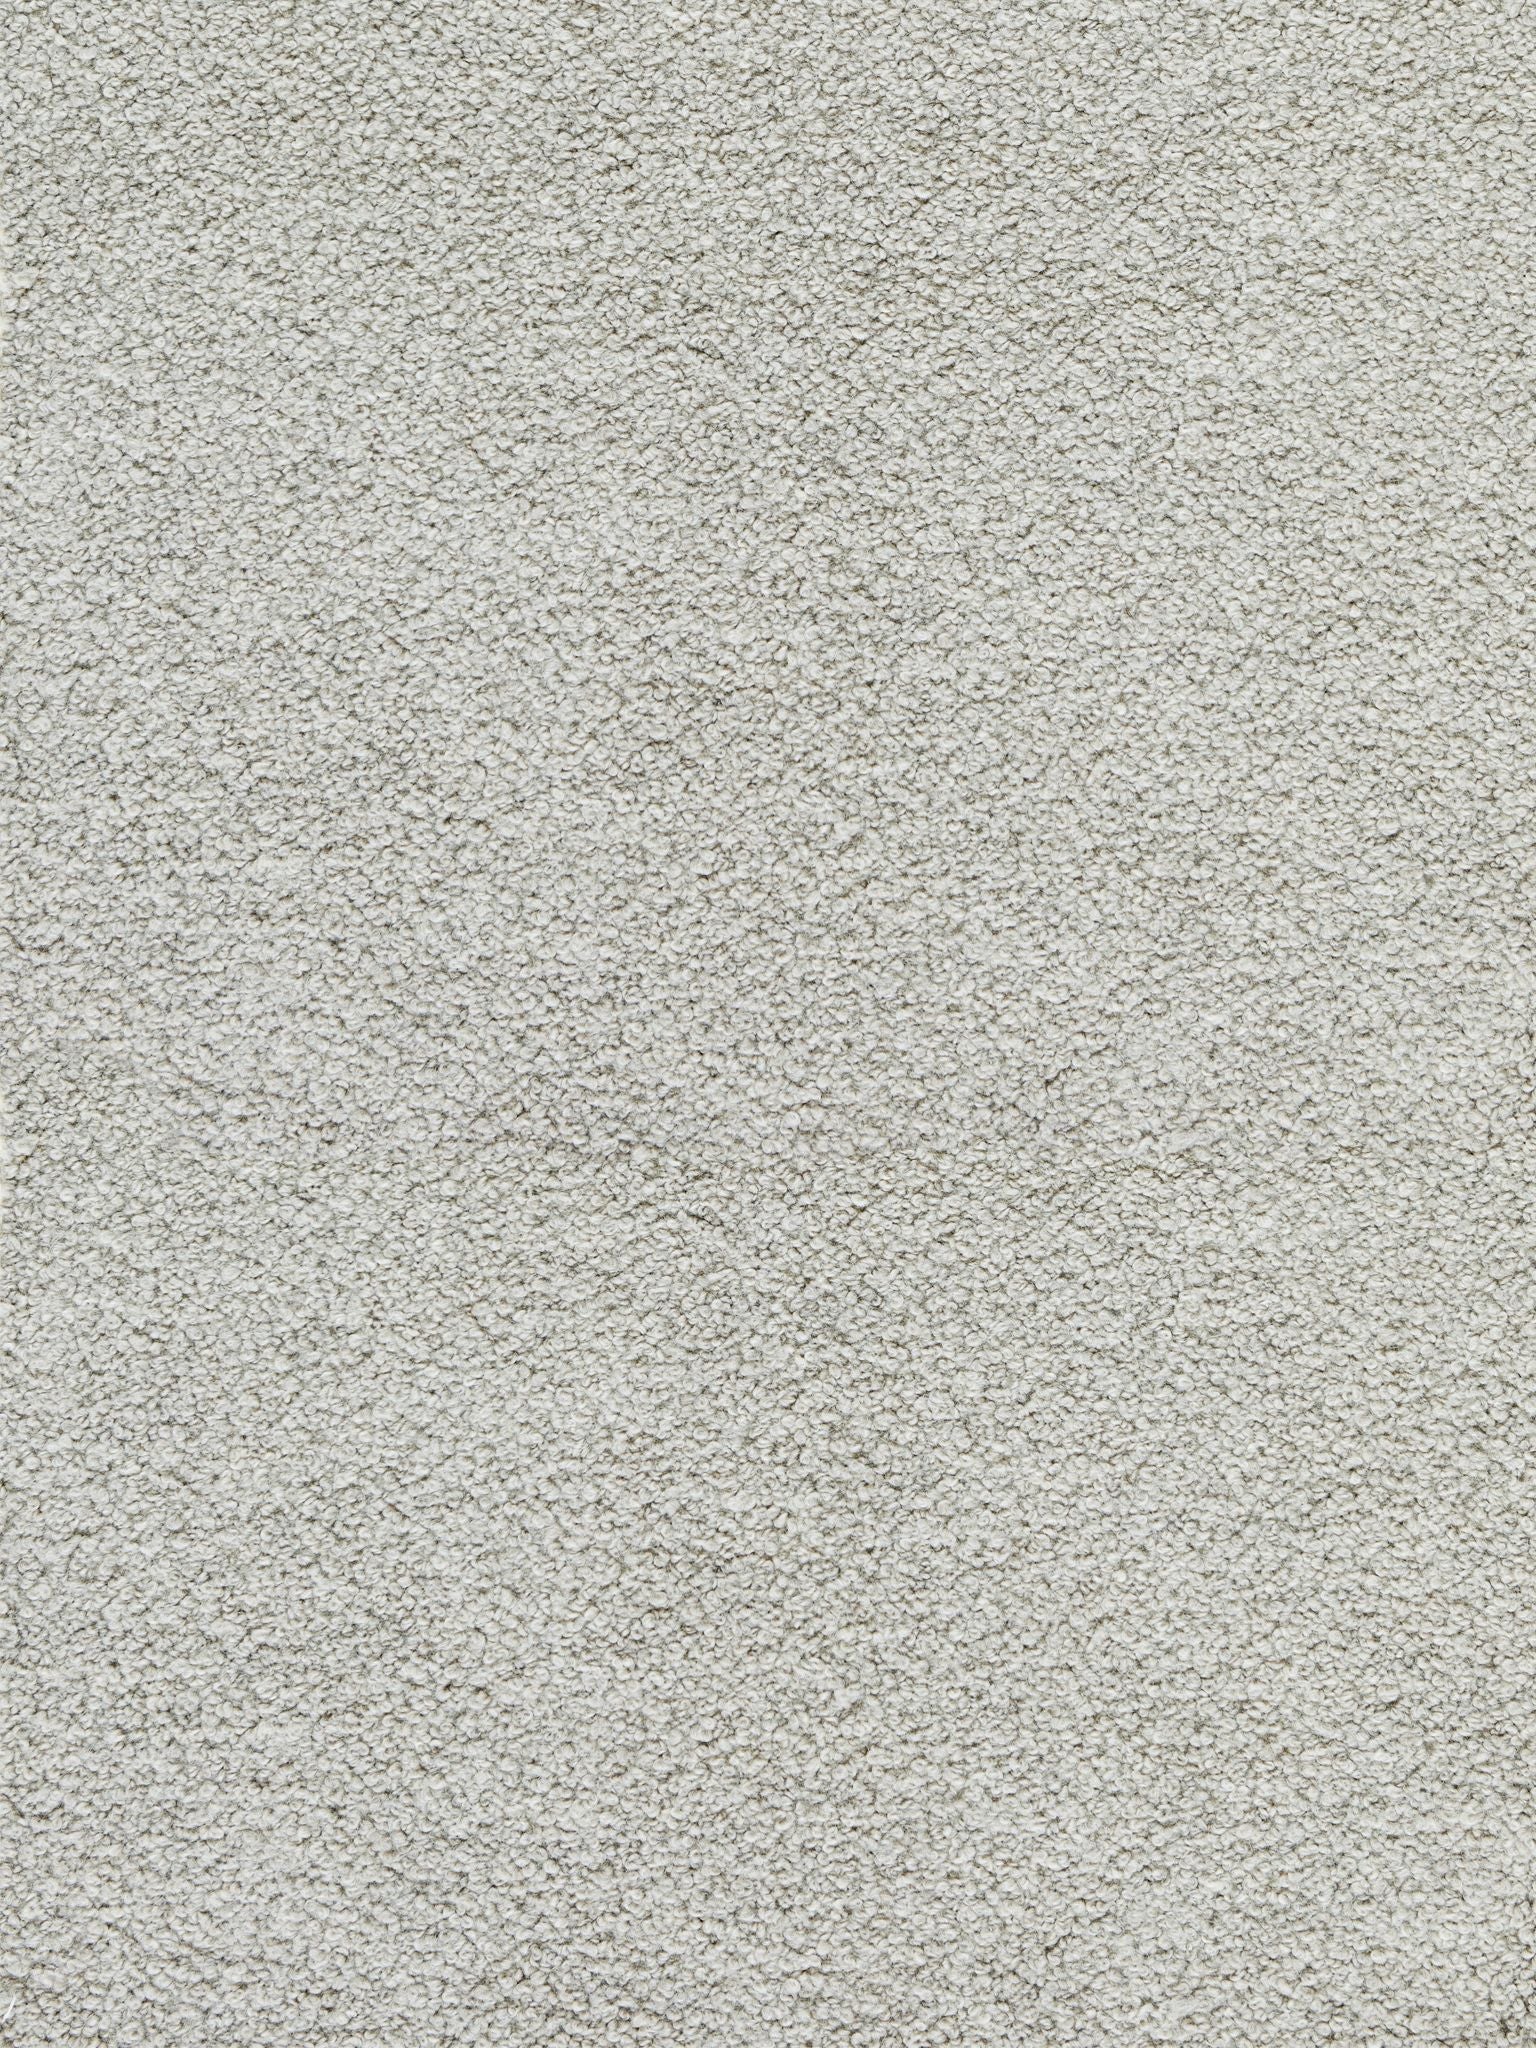 Mouton fabric in silver color - pattern number BZ 0002A501 - by Scalamandre in the Old World Weavers collection